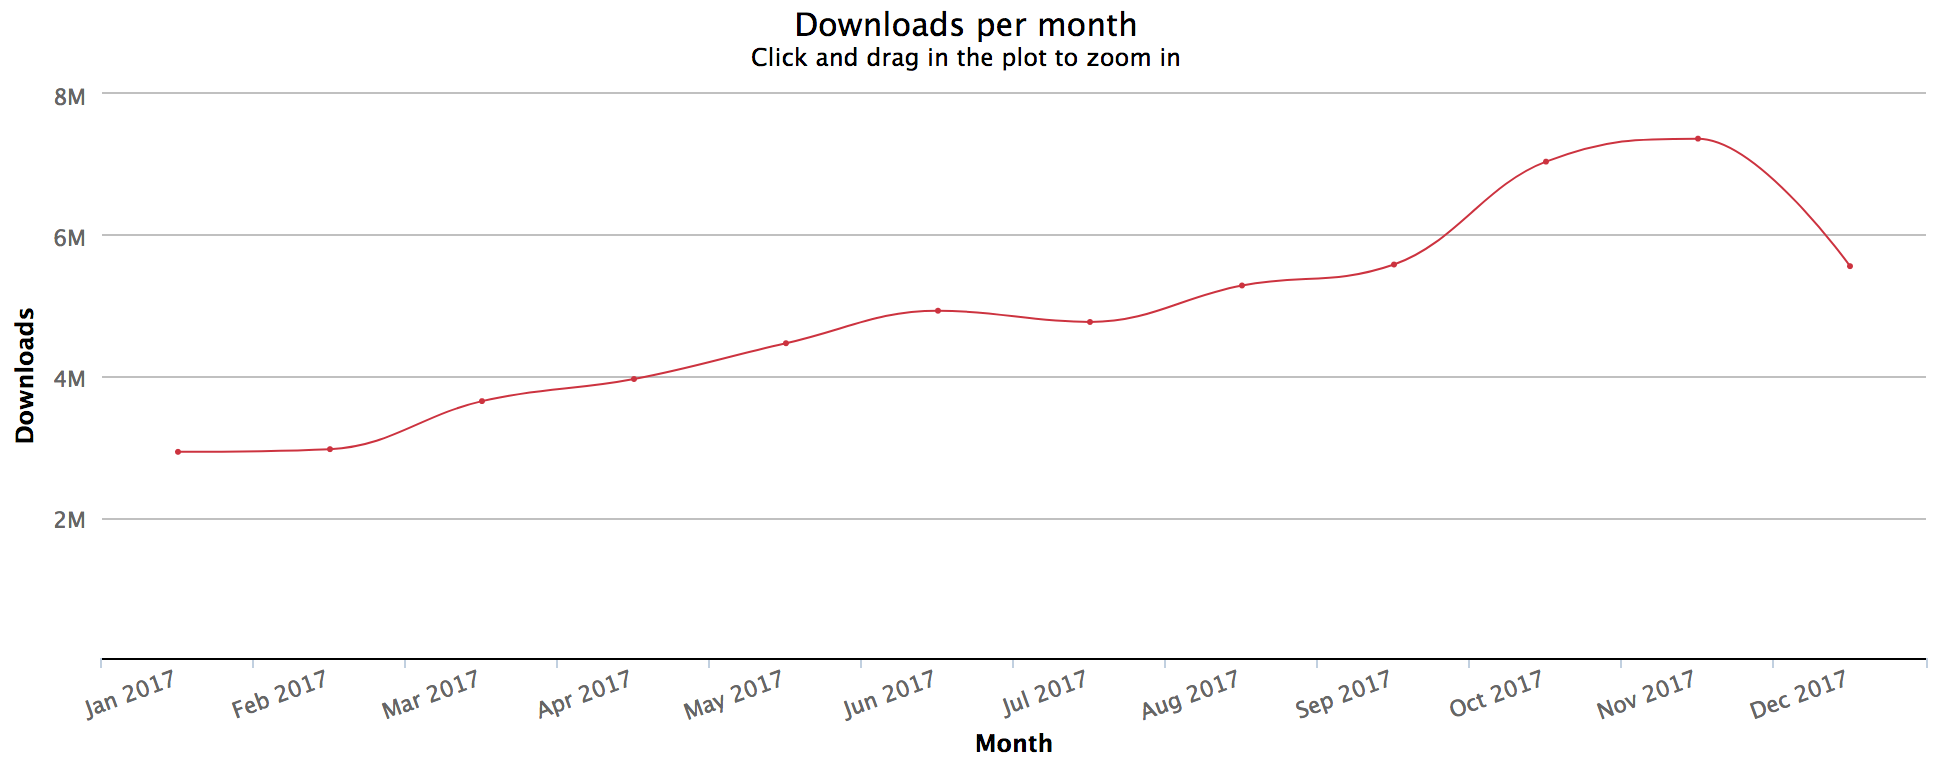 React downloads/month